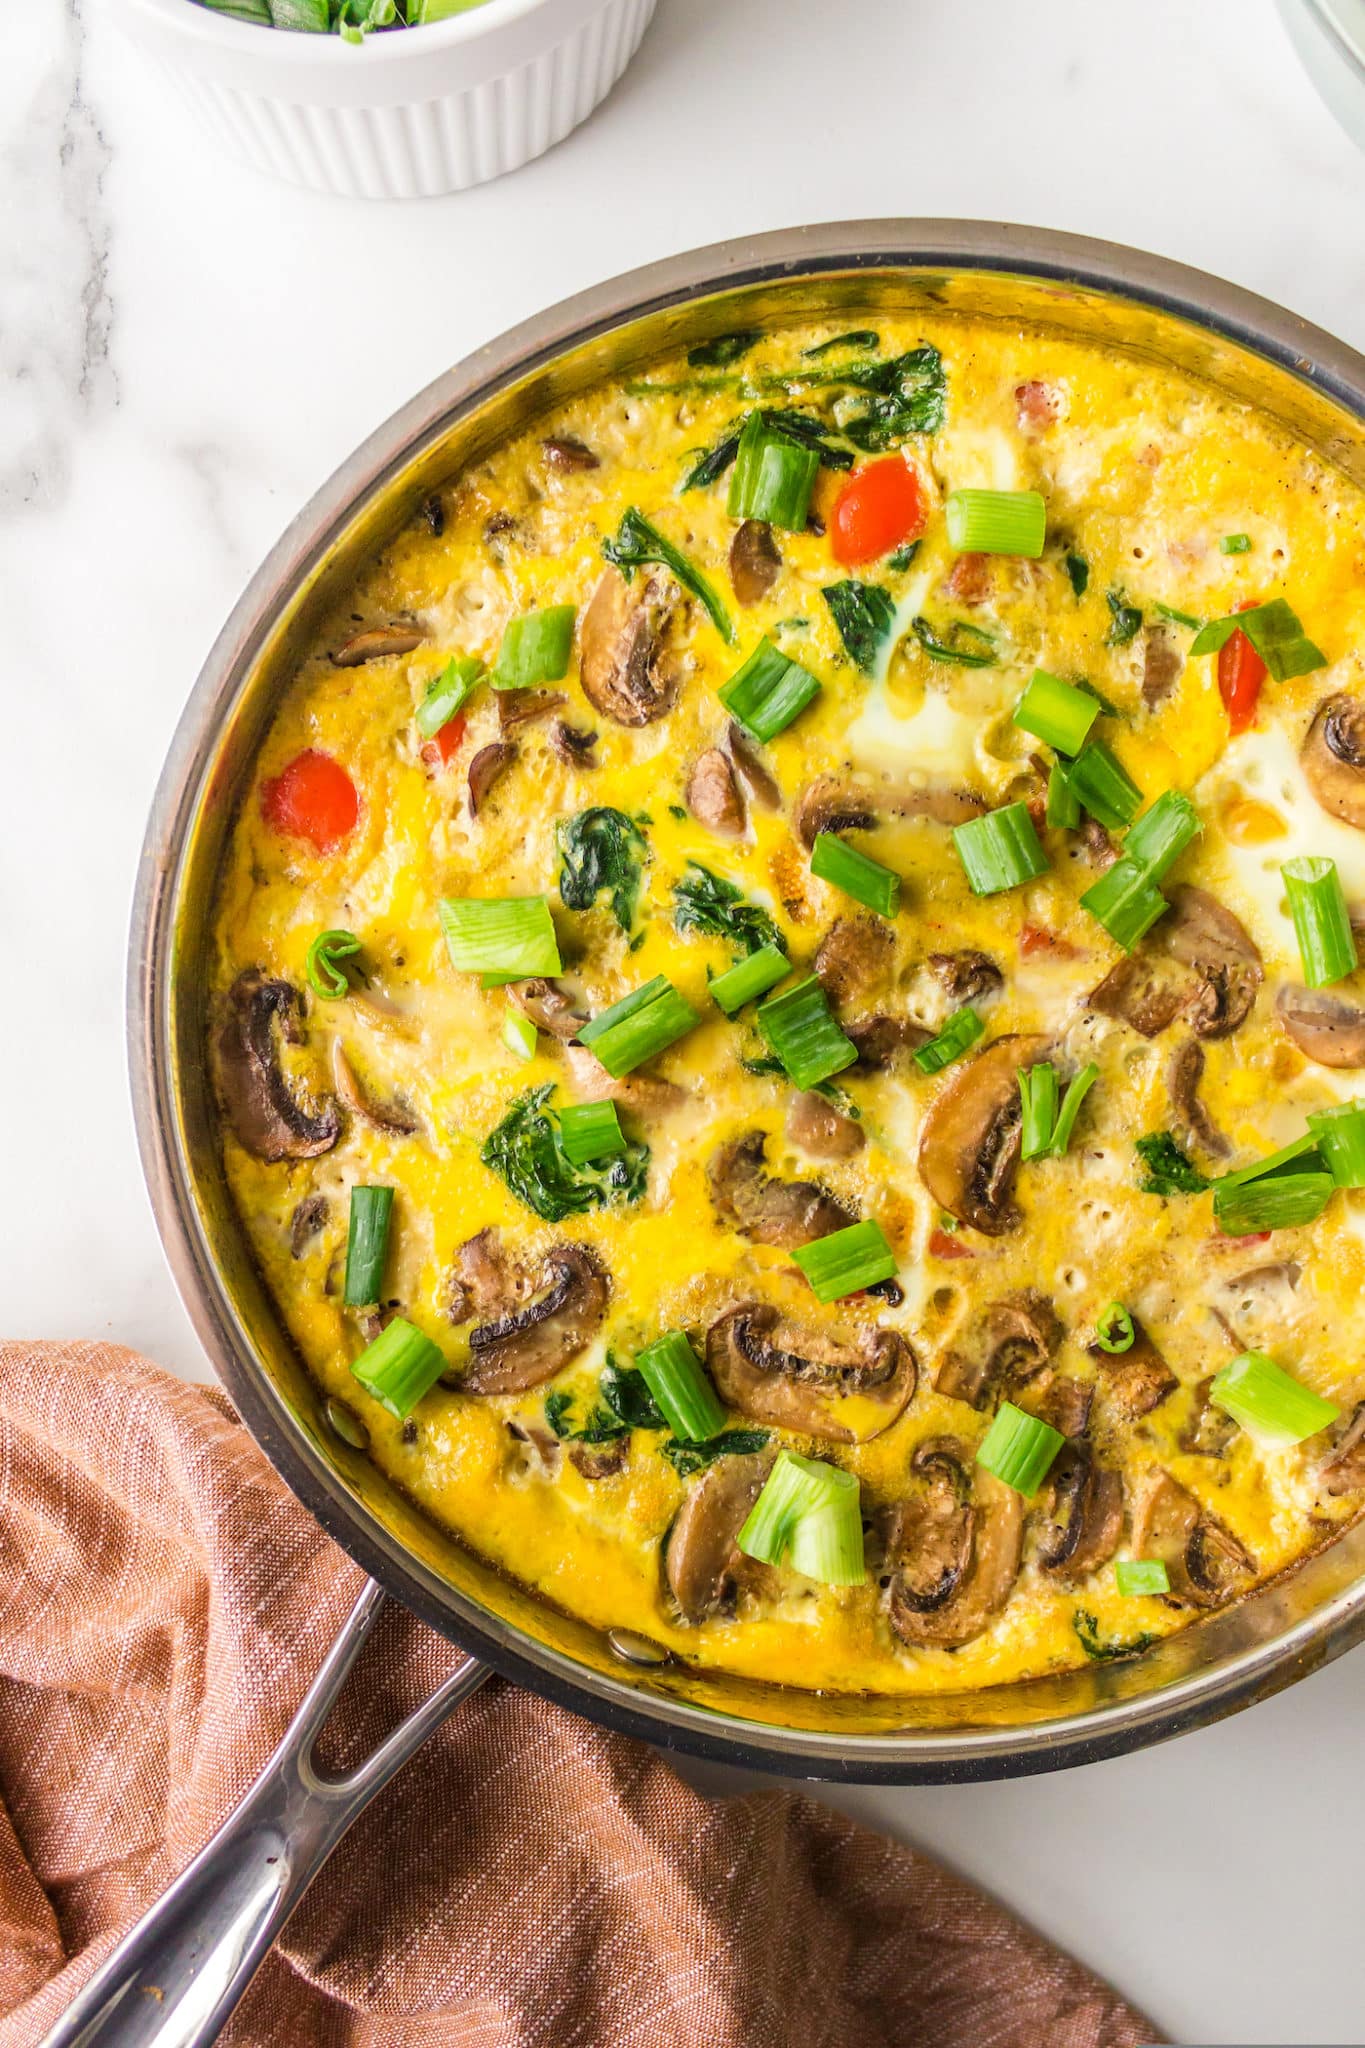 A vegetable gluten-free frittata without dairy baked in a pan.